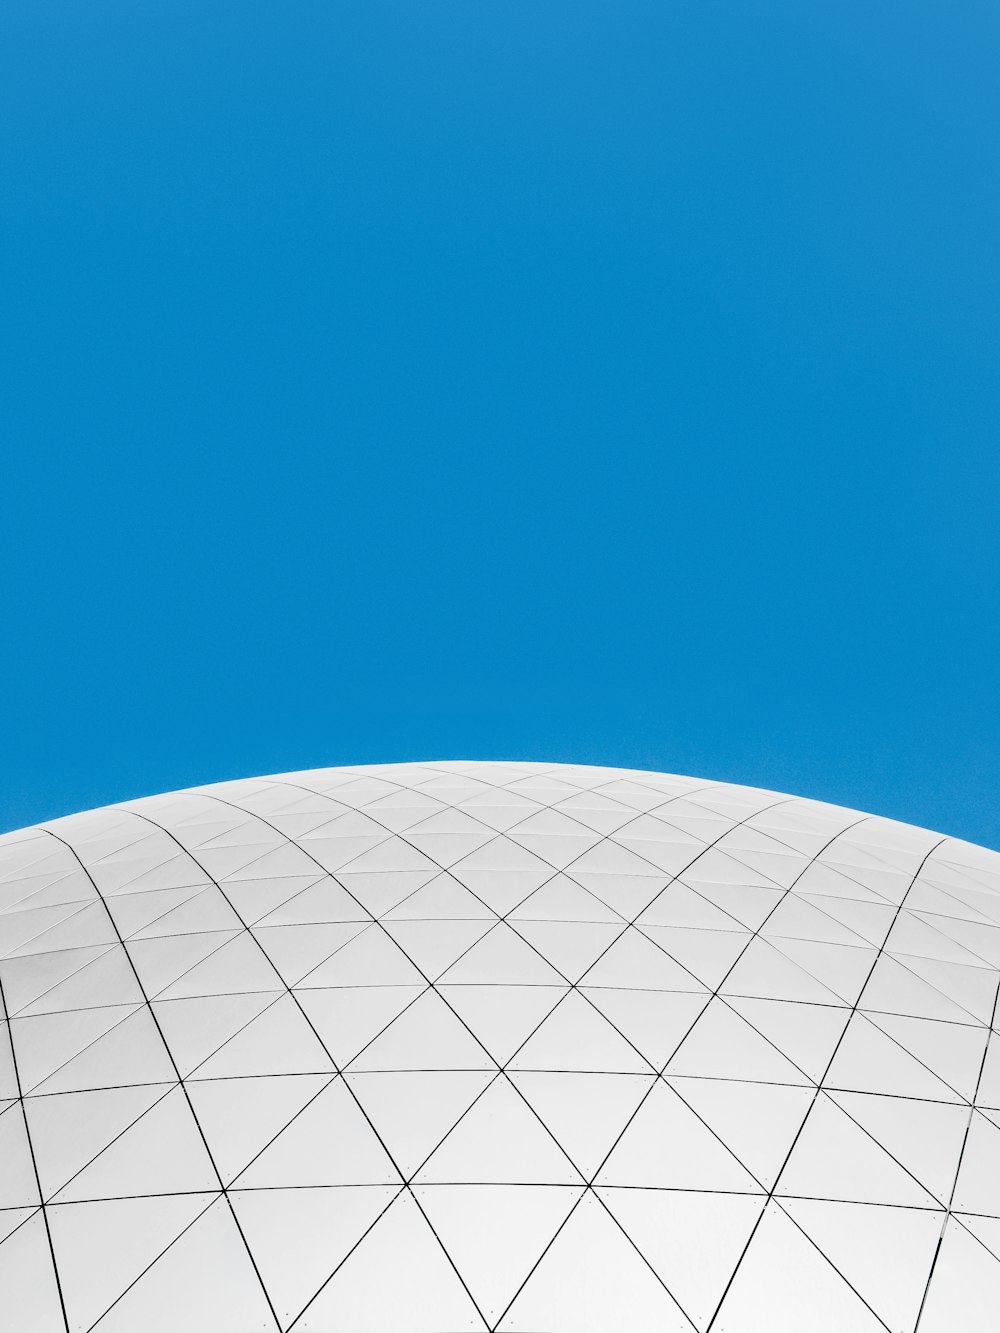 white dome building under blue sky during daytime